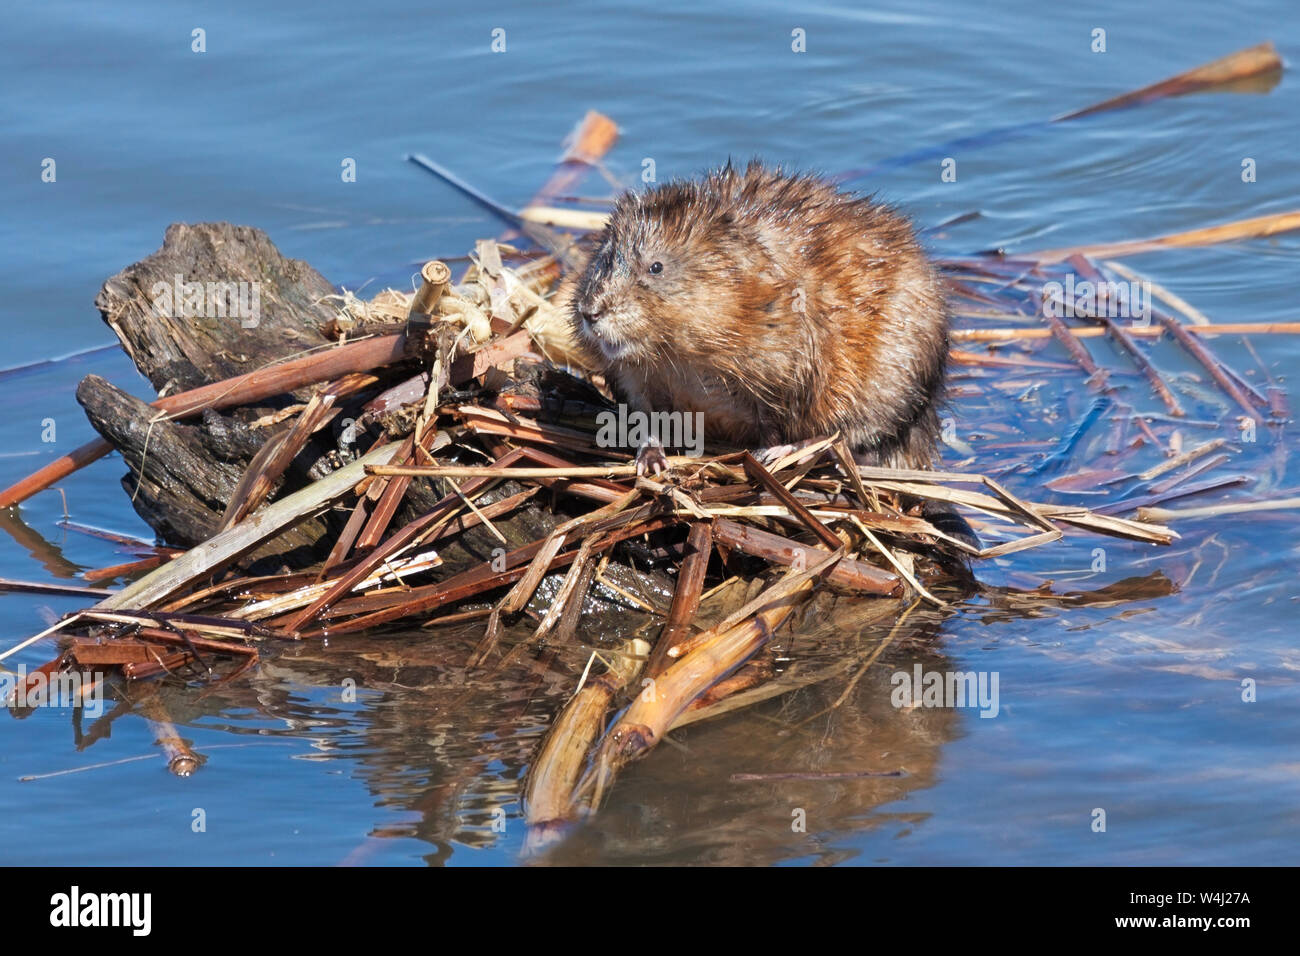 A wary muskrat sits atop its lodge preparing to dive into the blue water below. Stock Photo